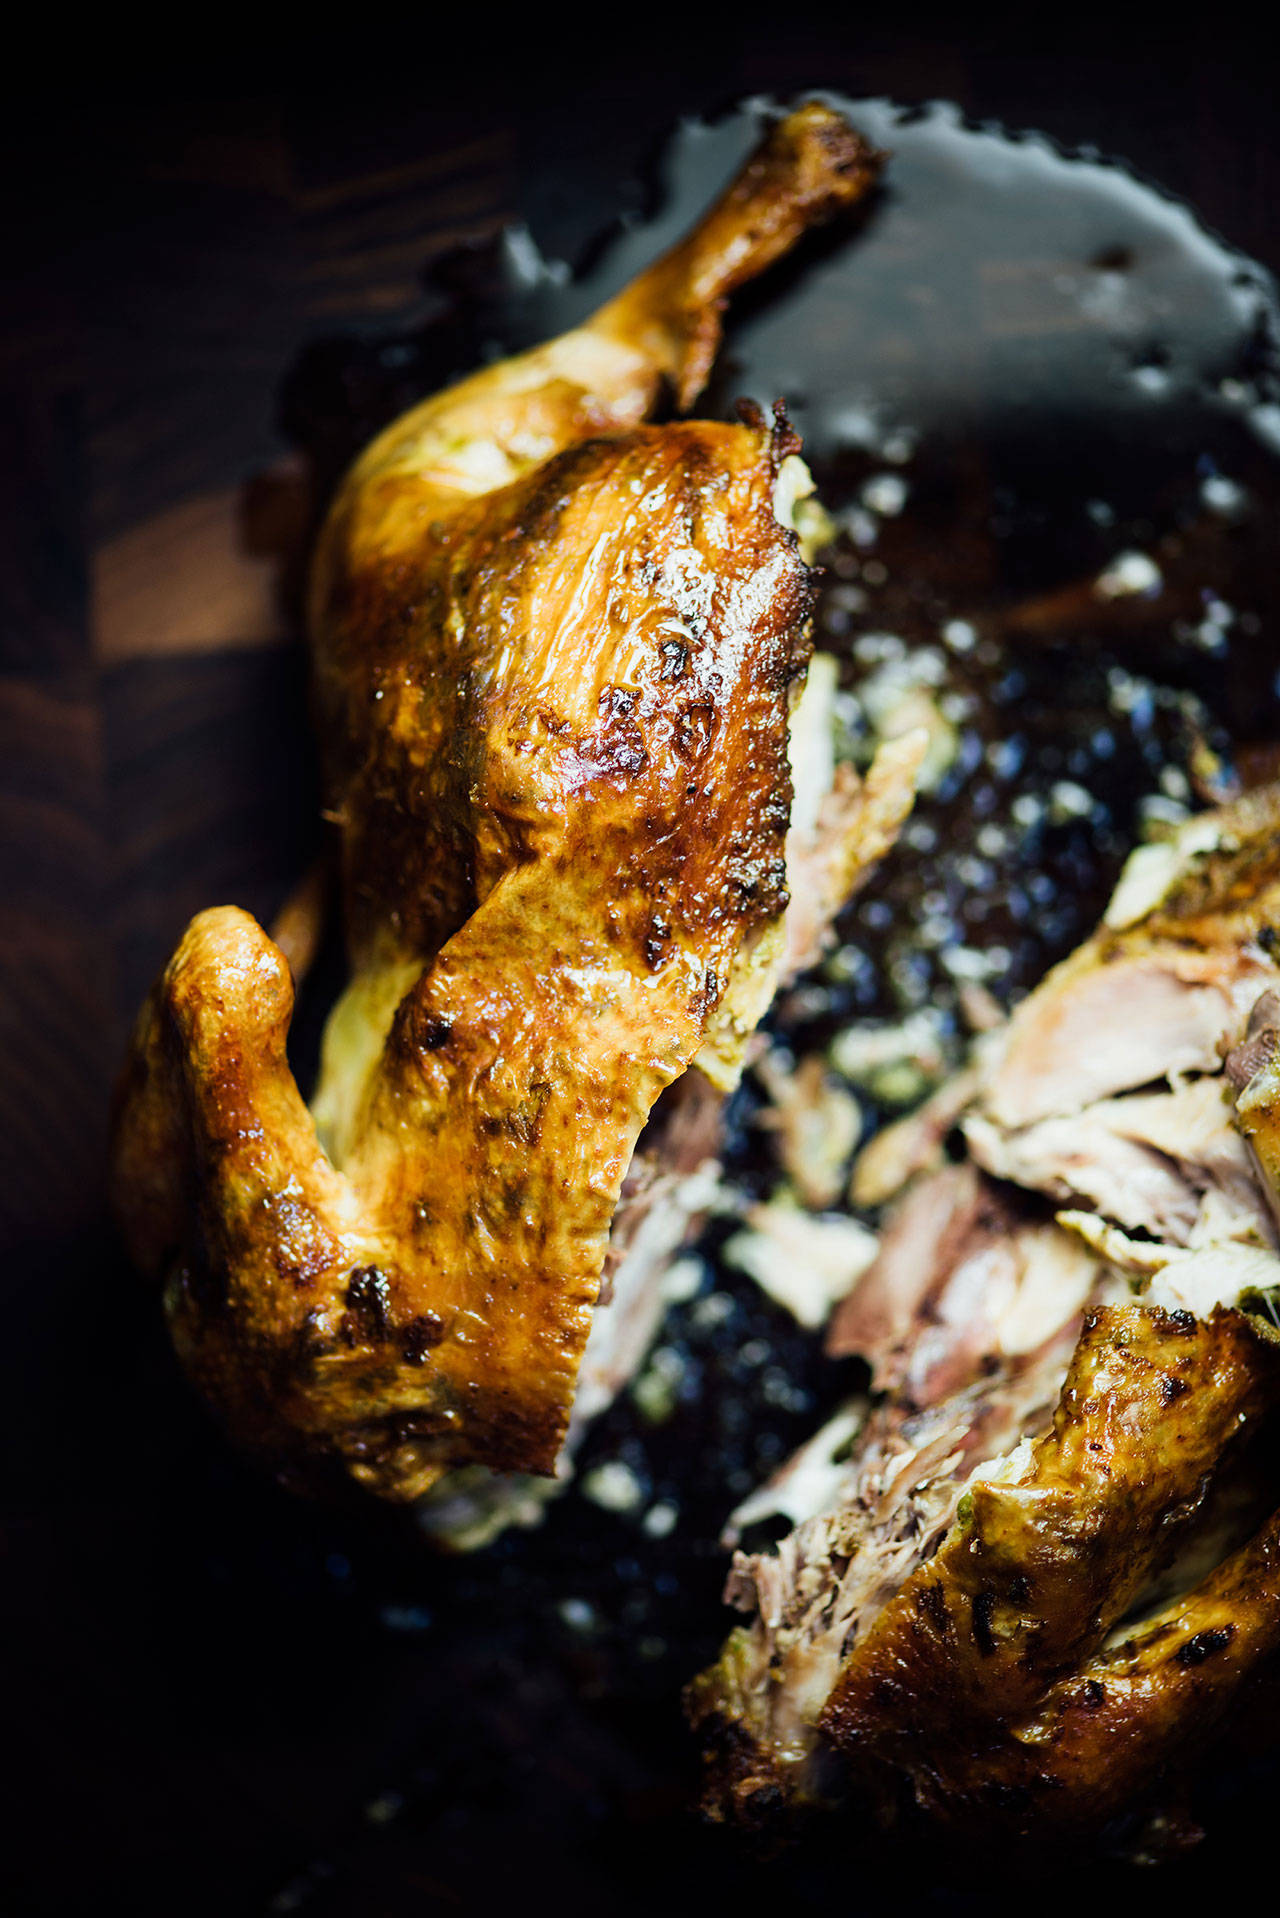 This roasted chicken is smothered in a hot green chutney. (Nik Sharma)